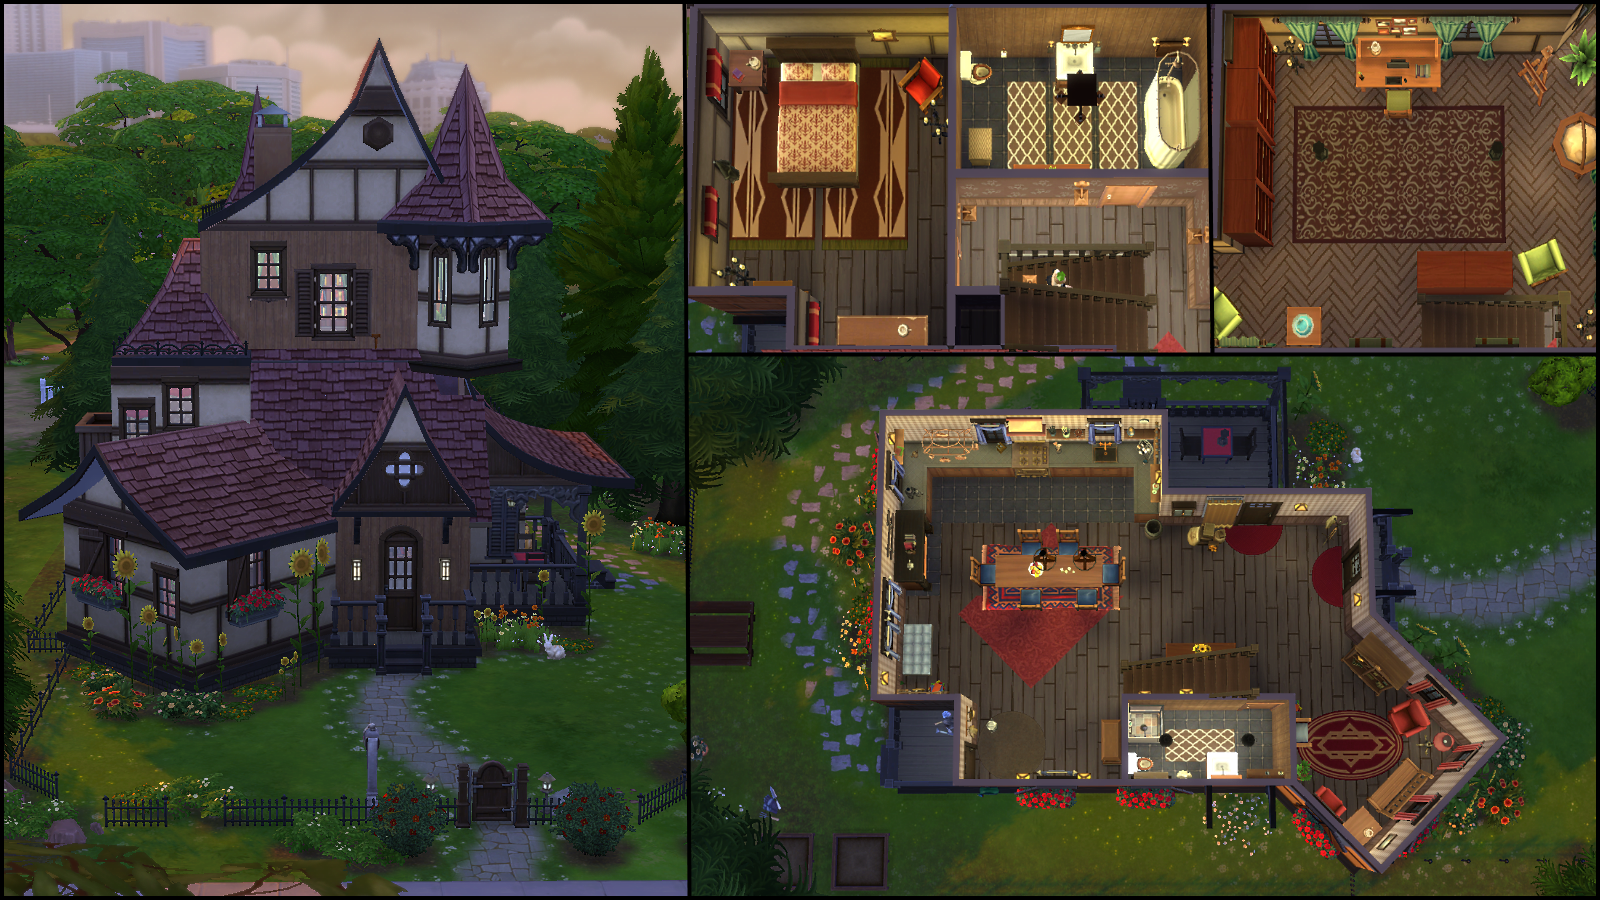 Поражение 4 дома. Симс 4 дом ведьмы. Симс 4 дом ведьмы планировка. Дом the Woodland Witch Cottage SIMS 4. Домик ведьмы симс 4.